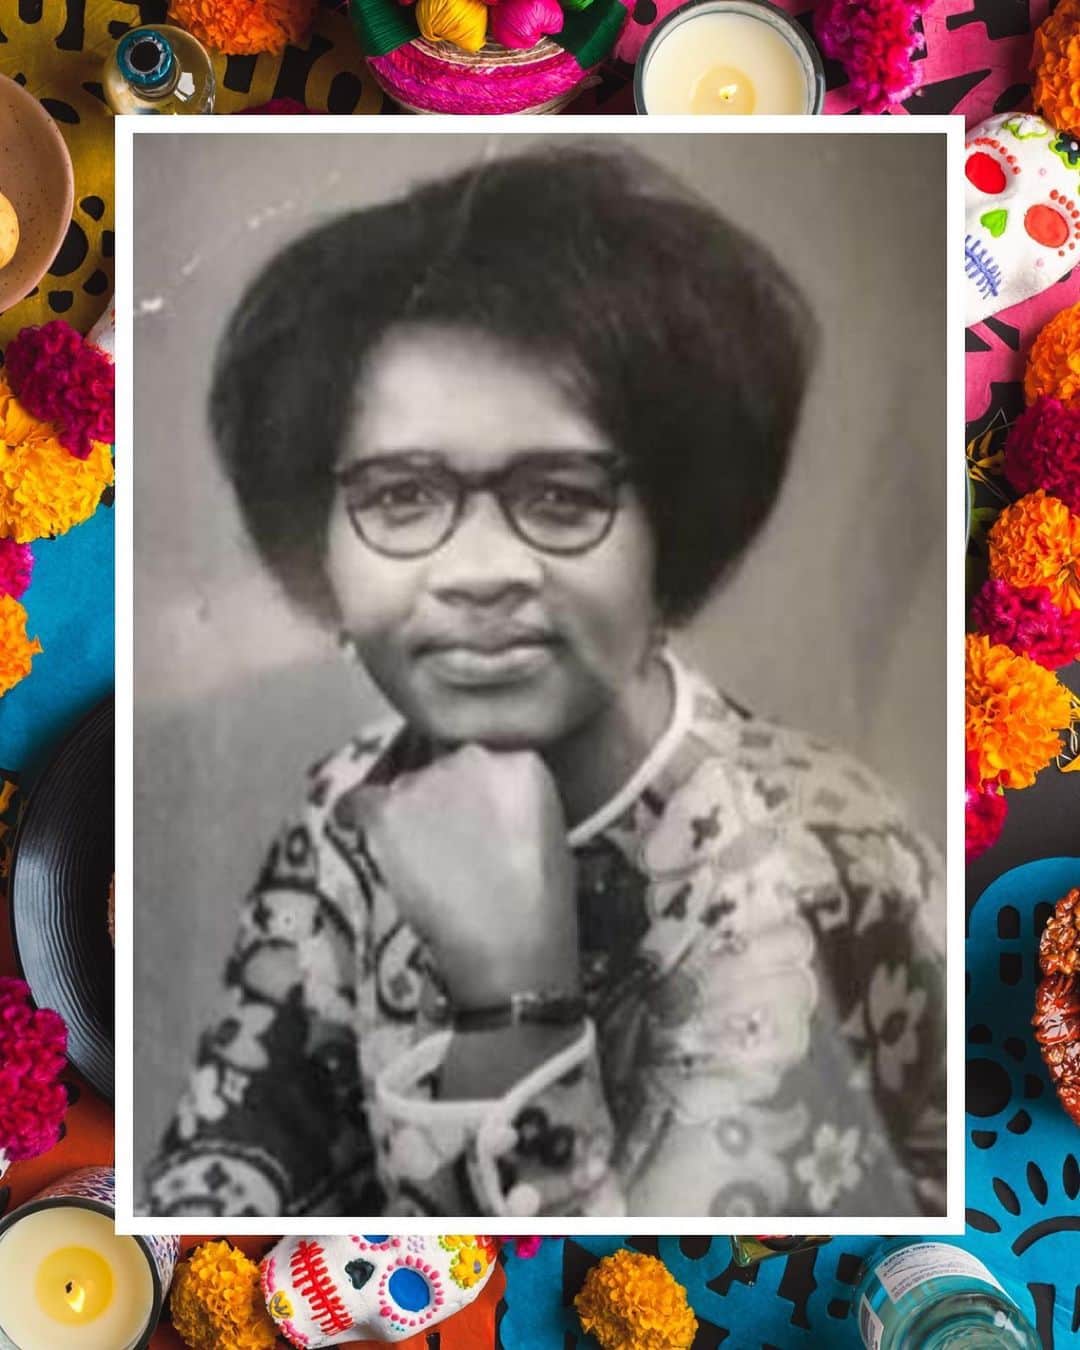 ルピタ・ニョンゴのインスタグラム：「Remembering these three guardians on Dia de los Muertos.   Rosemell Jane Achieng was my maternal grandmother. We called her Nyanya, but her children called her Honey. And that pet name rang true: she was sweet like honey and wrapped me up in warm hugs like honey wraps itself around your fingers. She would tell me stories and listen to my childish worries with patience and understanding. She loved to be entertained by her grandchildren. She marveled at our creativity and cheered us on for our small achievements. I stuck to her when she was around. She was taken from us too soon.  I remember my paternal grandmother, Dorca Owino Amolo, always bent over, working. She was never idle. She picked corn from her farm, kernelled it, dried it in the sun, sent it to be ground into flour in the local mill, and then cooked it into large mounds of delicious Ugali for the whole family to eat. She grew vegetables, raised livestock, and fermented her own milk. She swept, washed, brushed, scrubbed, chopped, stirred, pounded, and rolled. And she did all of this quietly, swiftly, gracefully, and with joy. Grandma taught me that work can be an expression of love, and I learned how to love the work of my body from her.  I had the honor of meeting one of my all-time heroes, Sidney Poitier, and I introduced him to my father. Mr. Poitier’s story and journey lit the path for me as an African coming to America to pursue a career in acting. He did the impossible and he did it with grace and dignity. When I met him, Mr. Poitier offered to take me to lunch the next time I was in town. It took me over a year to gather the courage to reach out and take him up on it, and I am so glad I did! They say don't meet your heroes because they may disappoint you; I dined with mine and gained even more respect and admiration for him than I had before!」